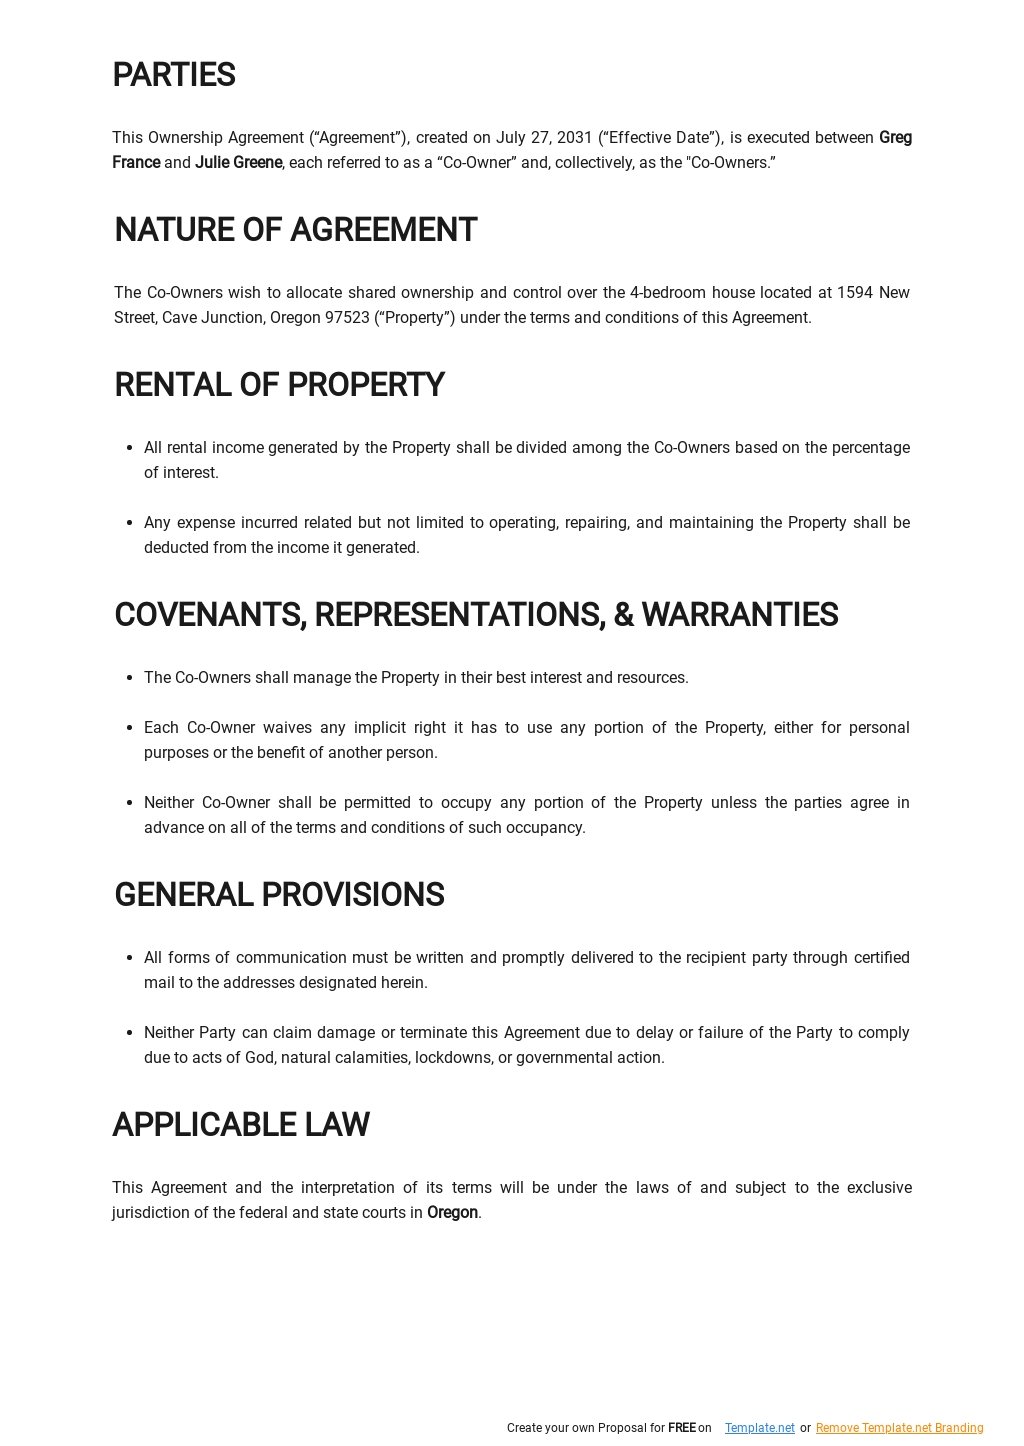 Shared Ownership Agreement Template